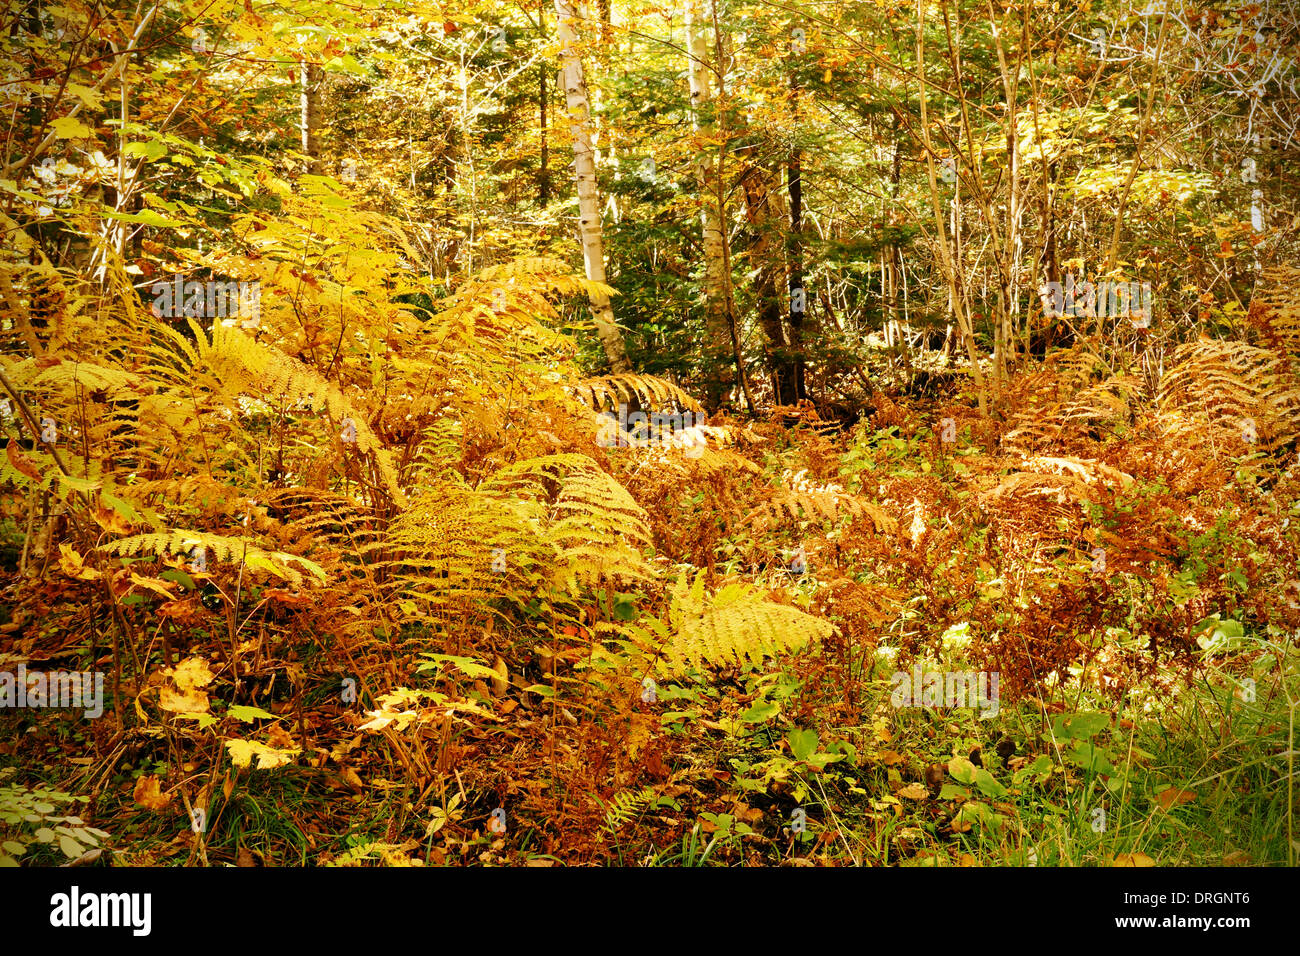 Dense forest underbrush with ferns and other bushes, dramatic yellow fall color nature background Stock Photo